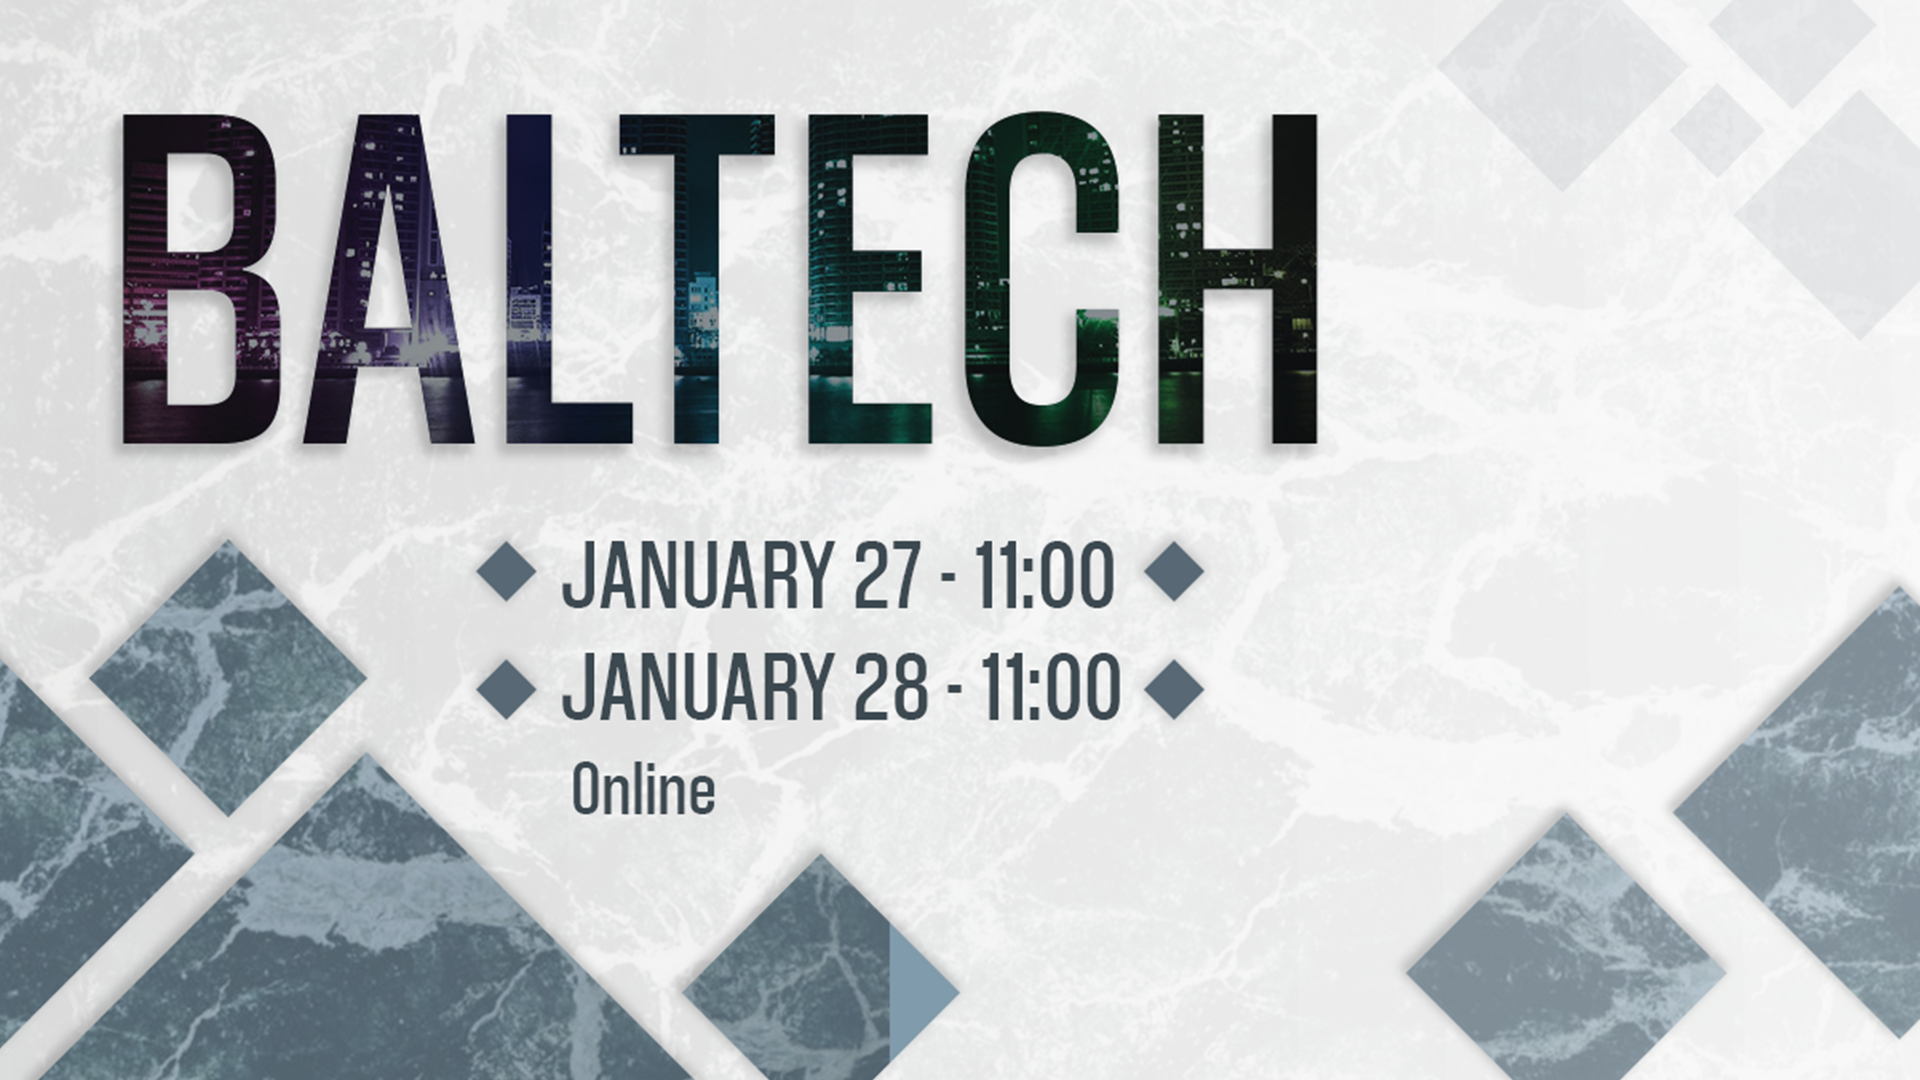 This is the first year the BALTECH conference will take place remotely